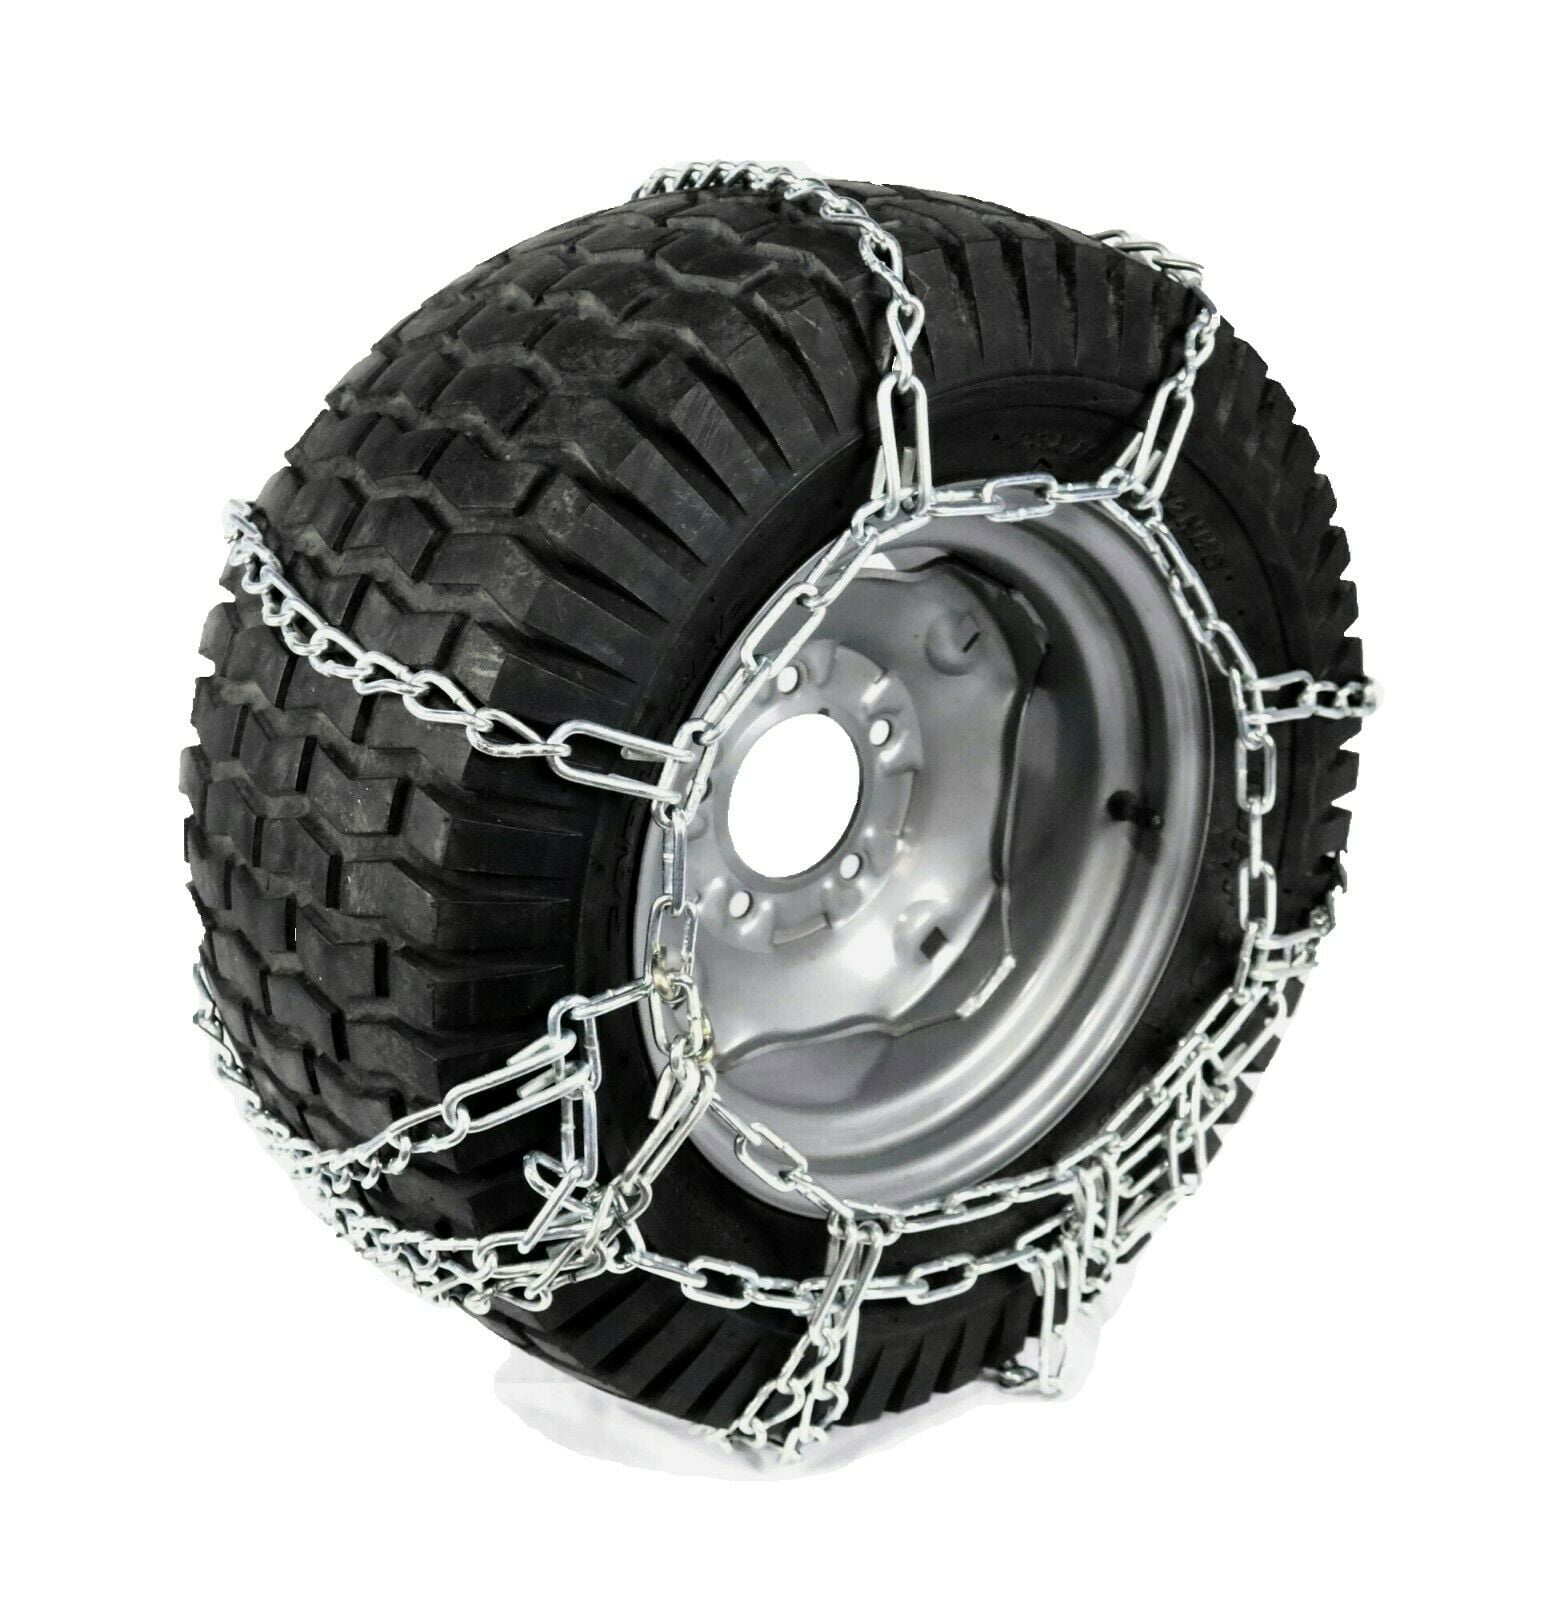 1 Tire Chain and Tightener Kit 20x8.00x8 20x8x8 2-Link Pair Sears Craftsman 